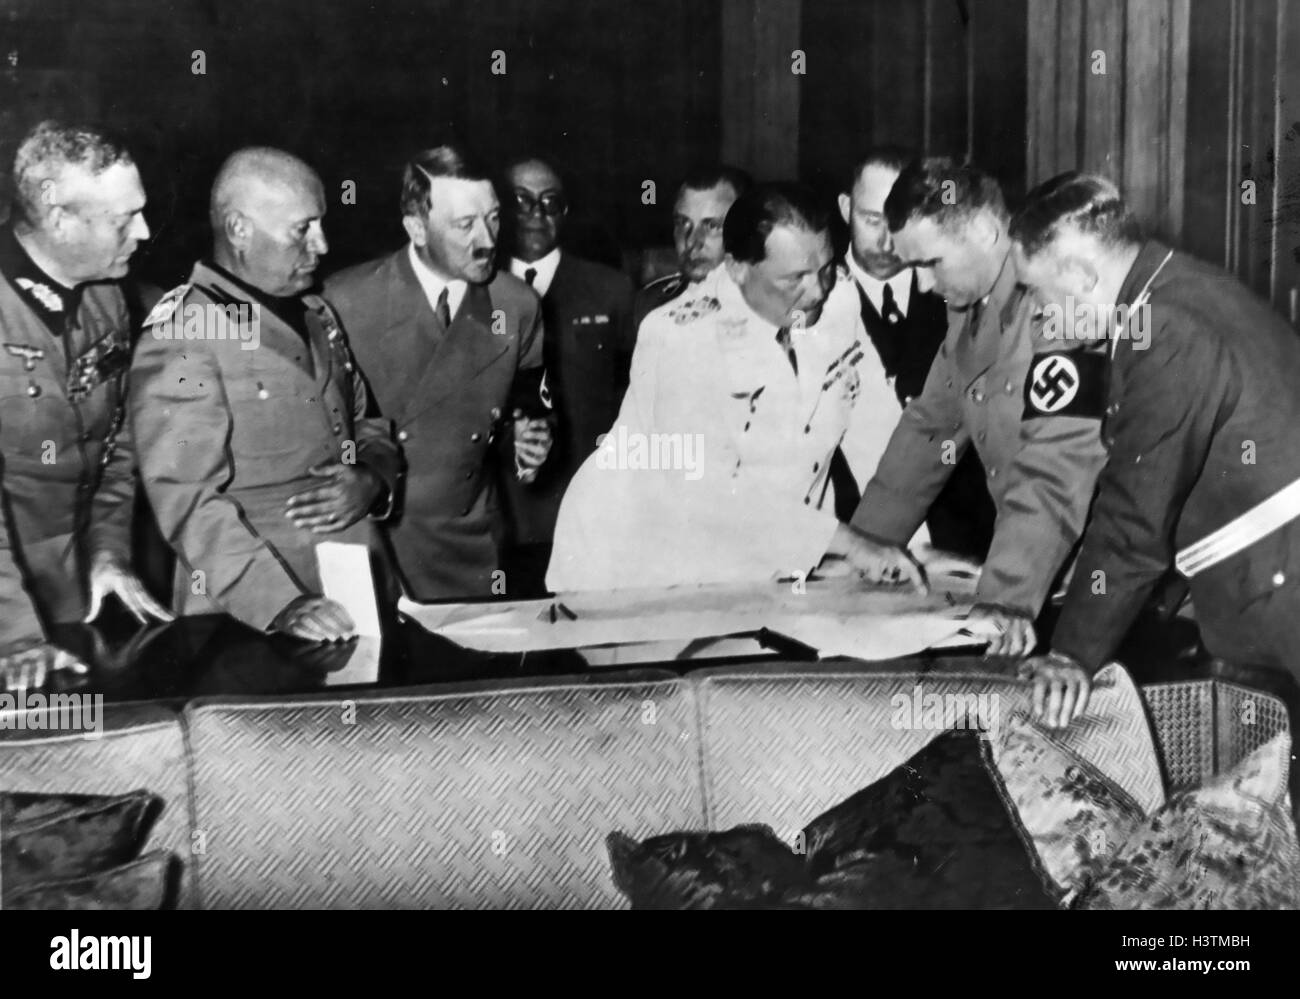 BENITO MUSSOLINI (1883-1945) second from left next to Adolf Hitler. Rudolf Hess (with armband) and Herman Goering (in white uniform) consult a map. About 1938. Stock Photo